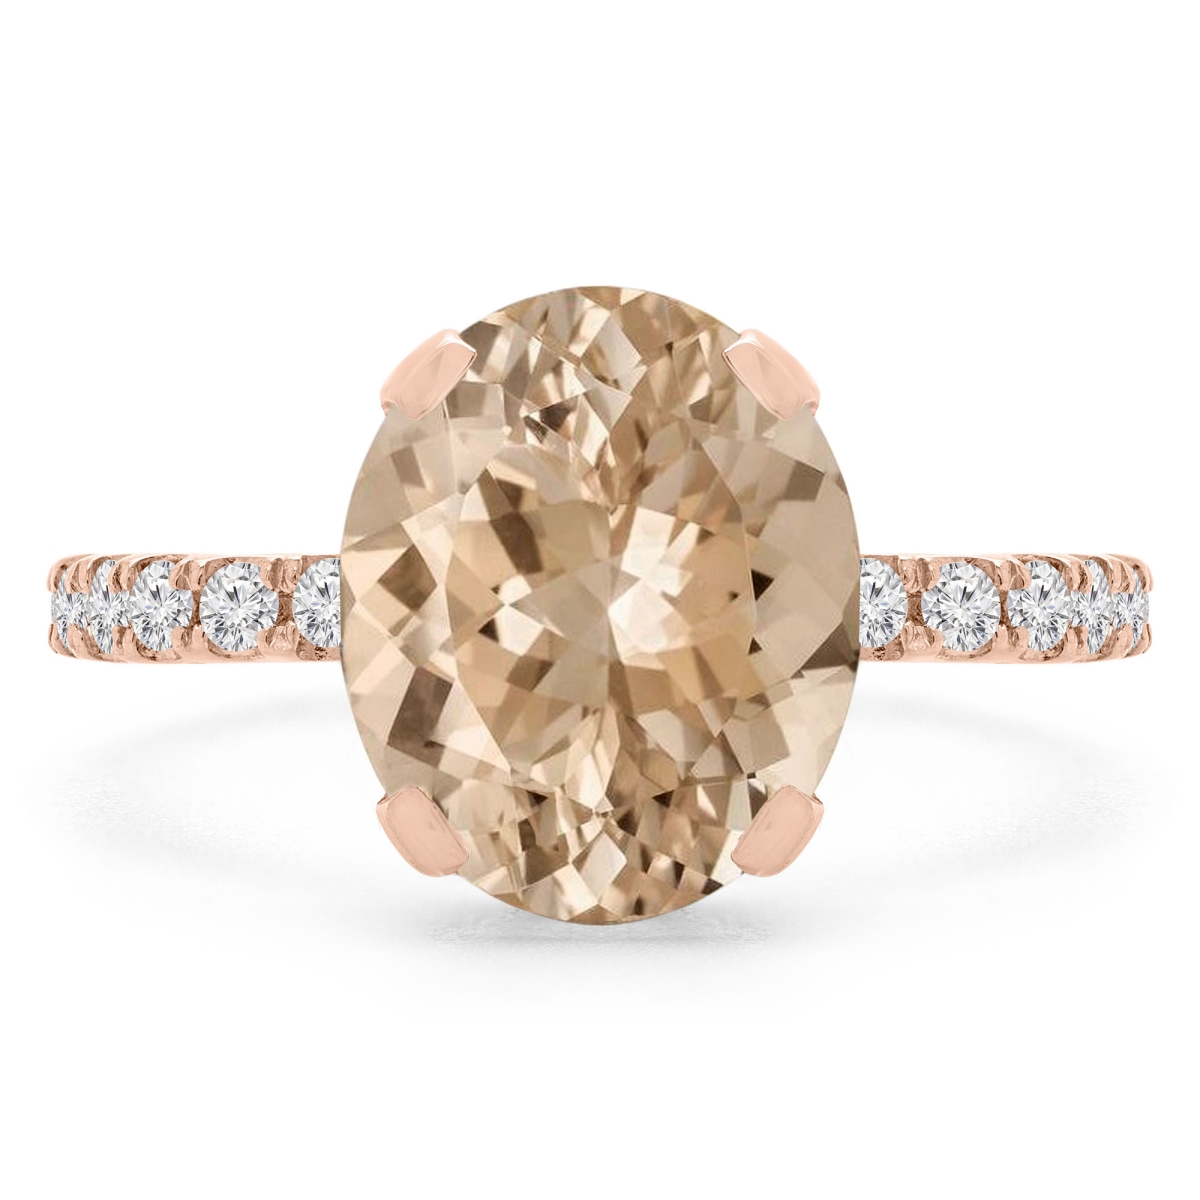 Picture of Majesty Diamonds MD190407-8.5 3.4 CTW Oval Pink Morganite Under Halo Engagement Ring in 14K Rose Gold - Size 8.5